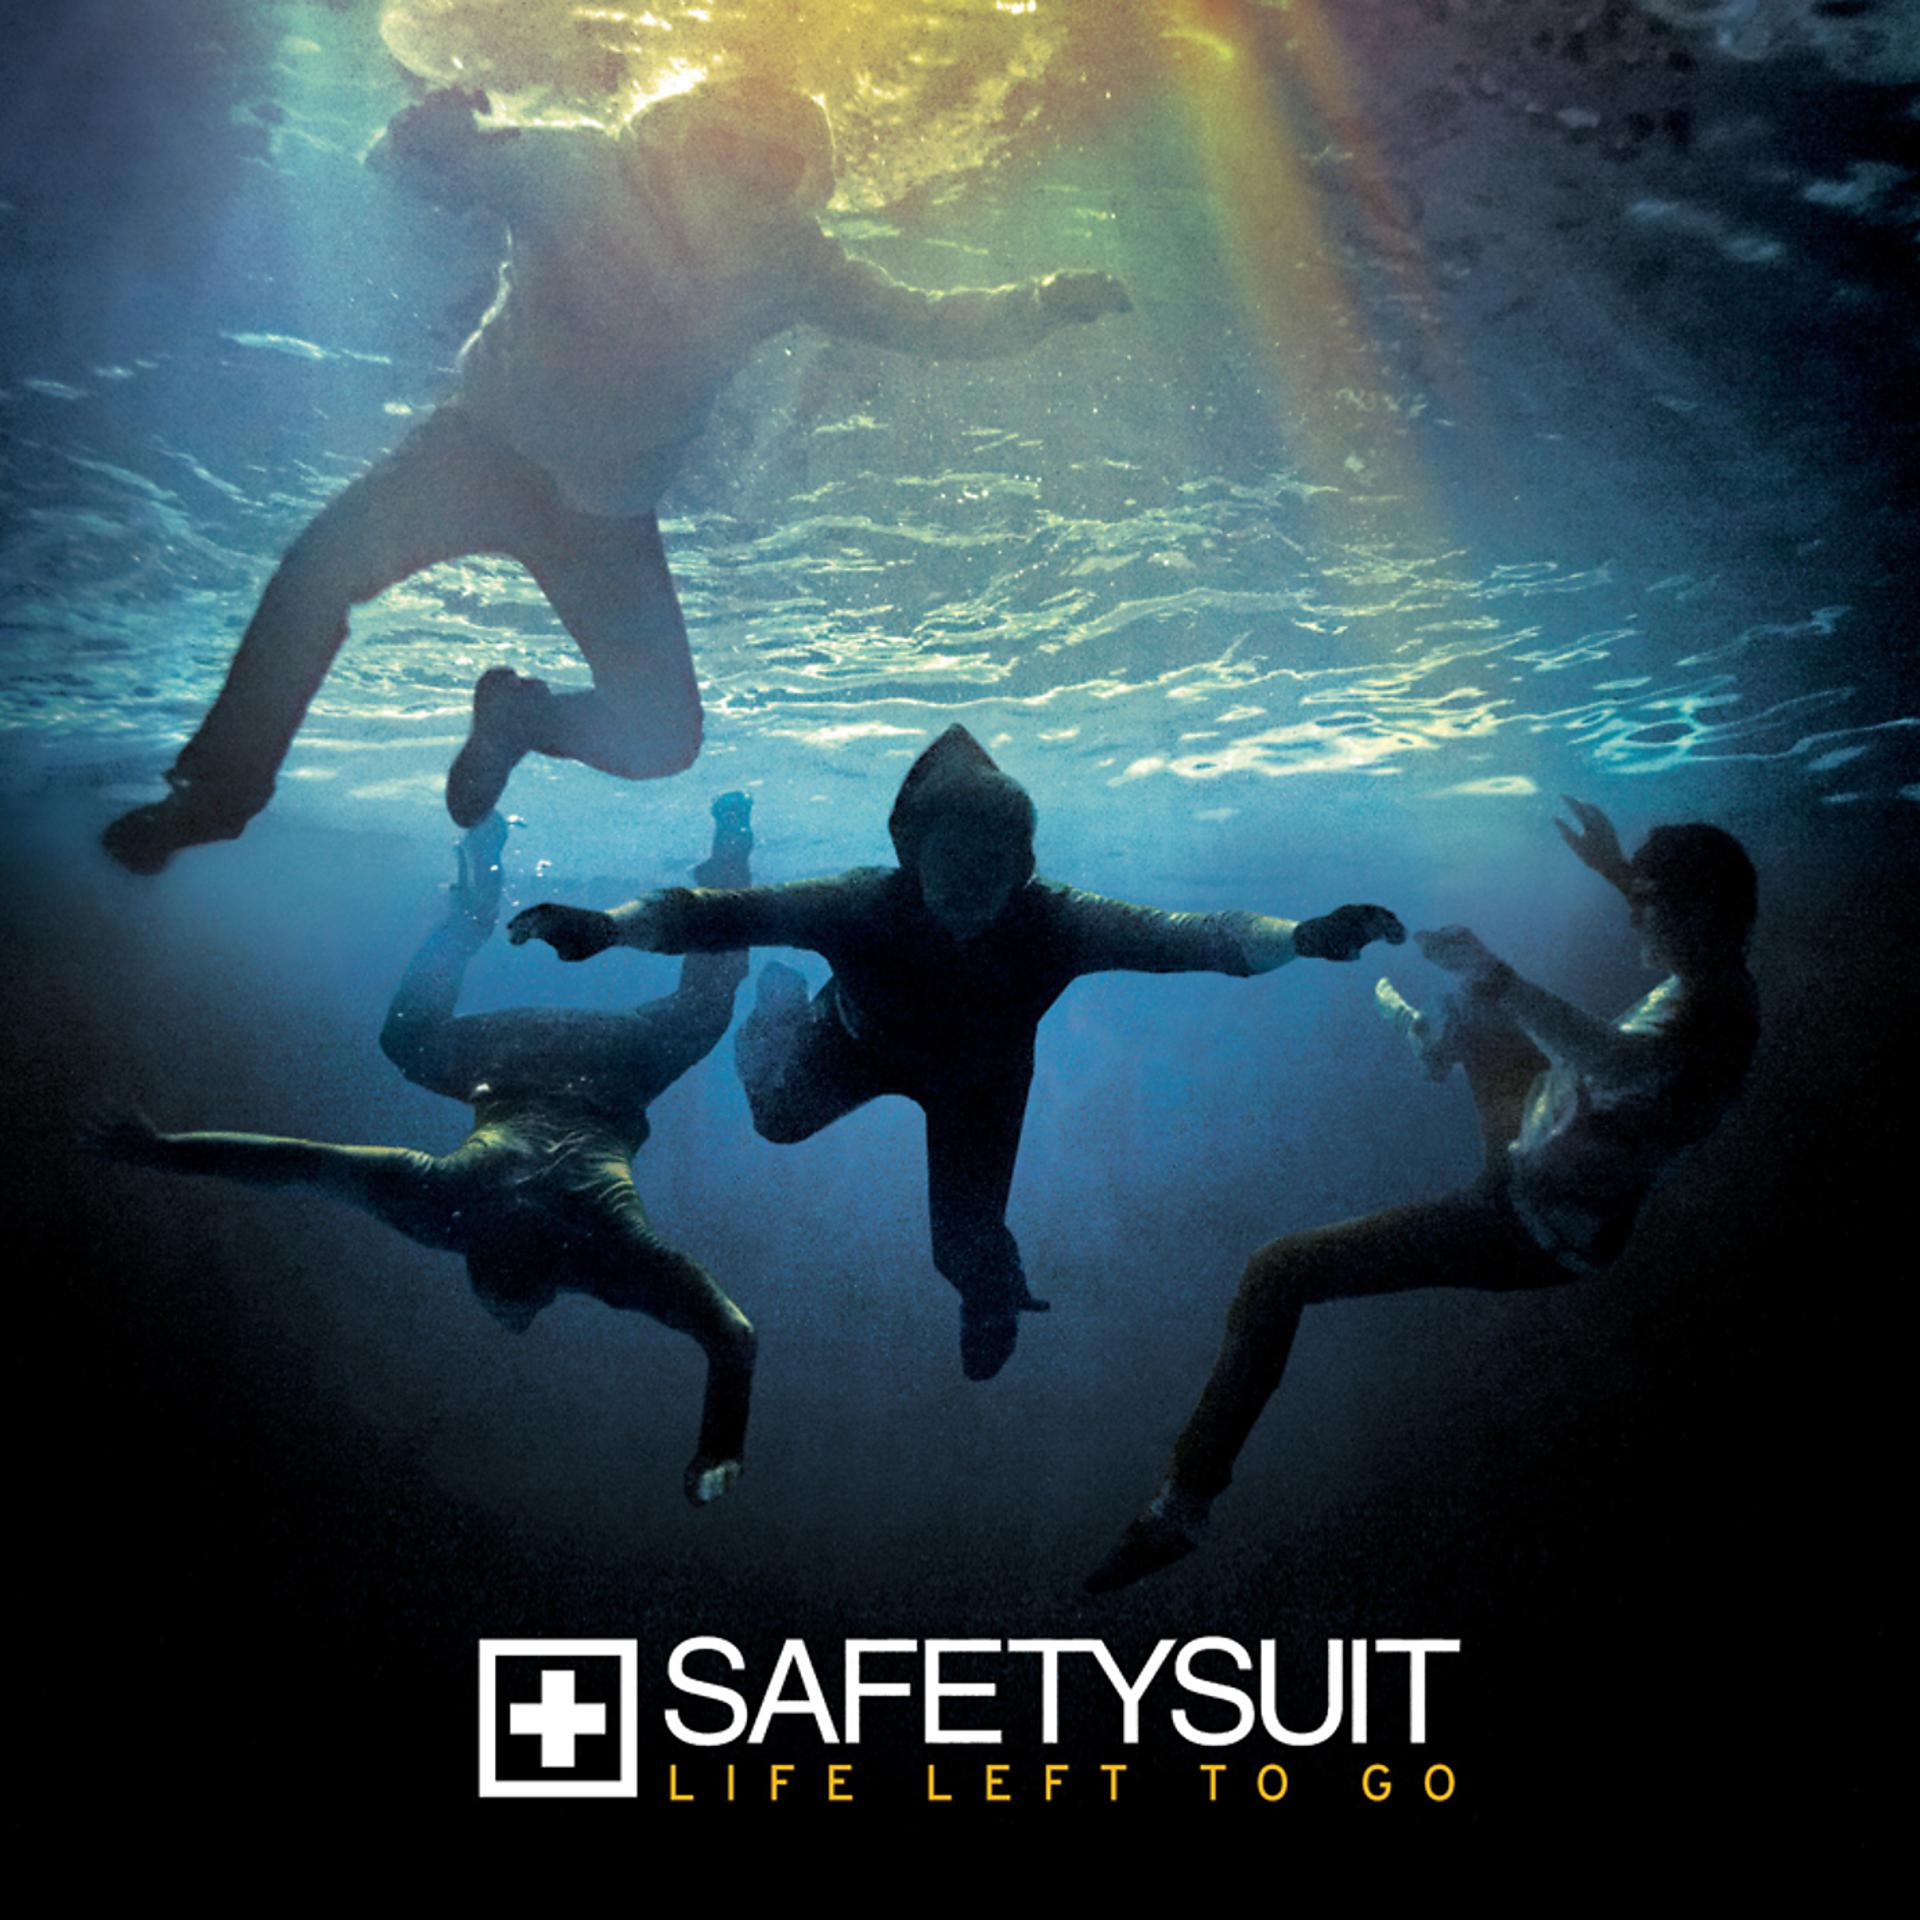 Life left to go. SAFETYSUIT. SAFETYSUIT - what if. Find a way — SAFETYSUIT. SAFETYSUIT - SAFETYSUIT (2016).